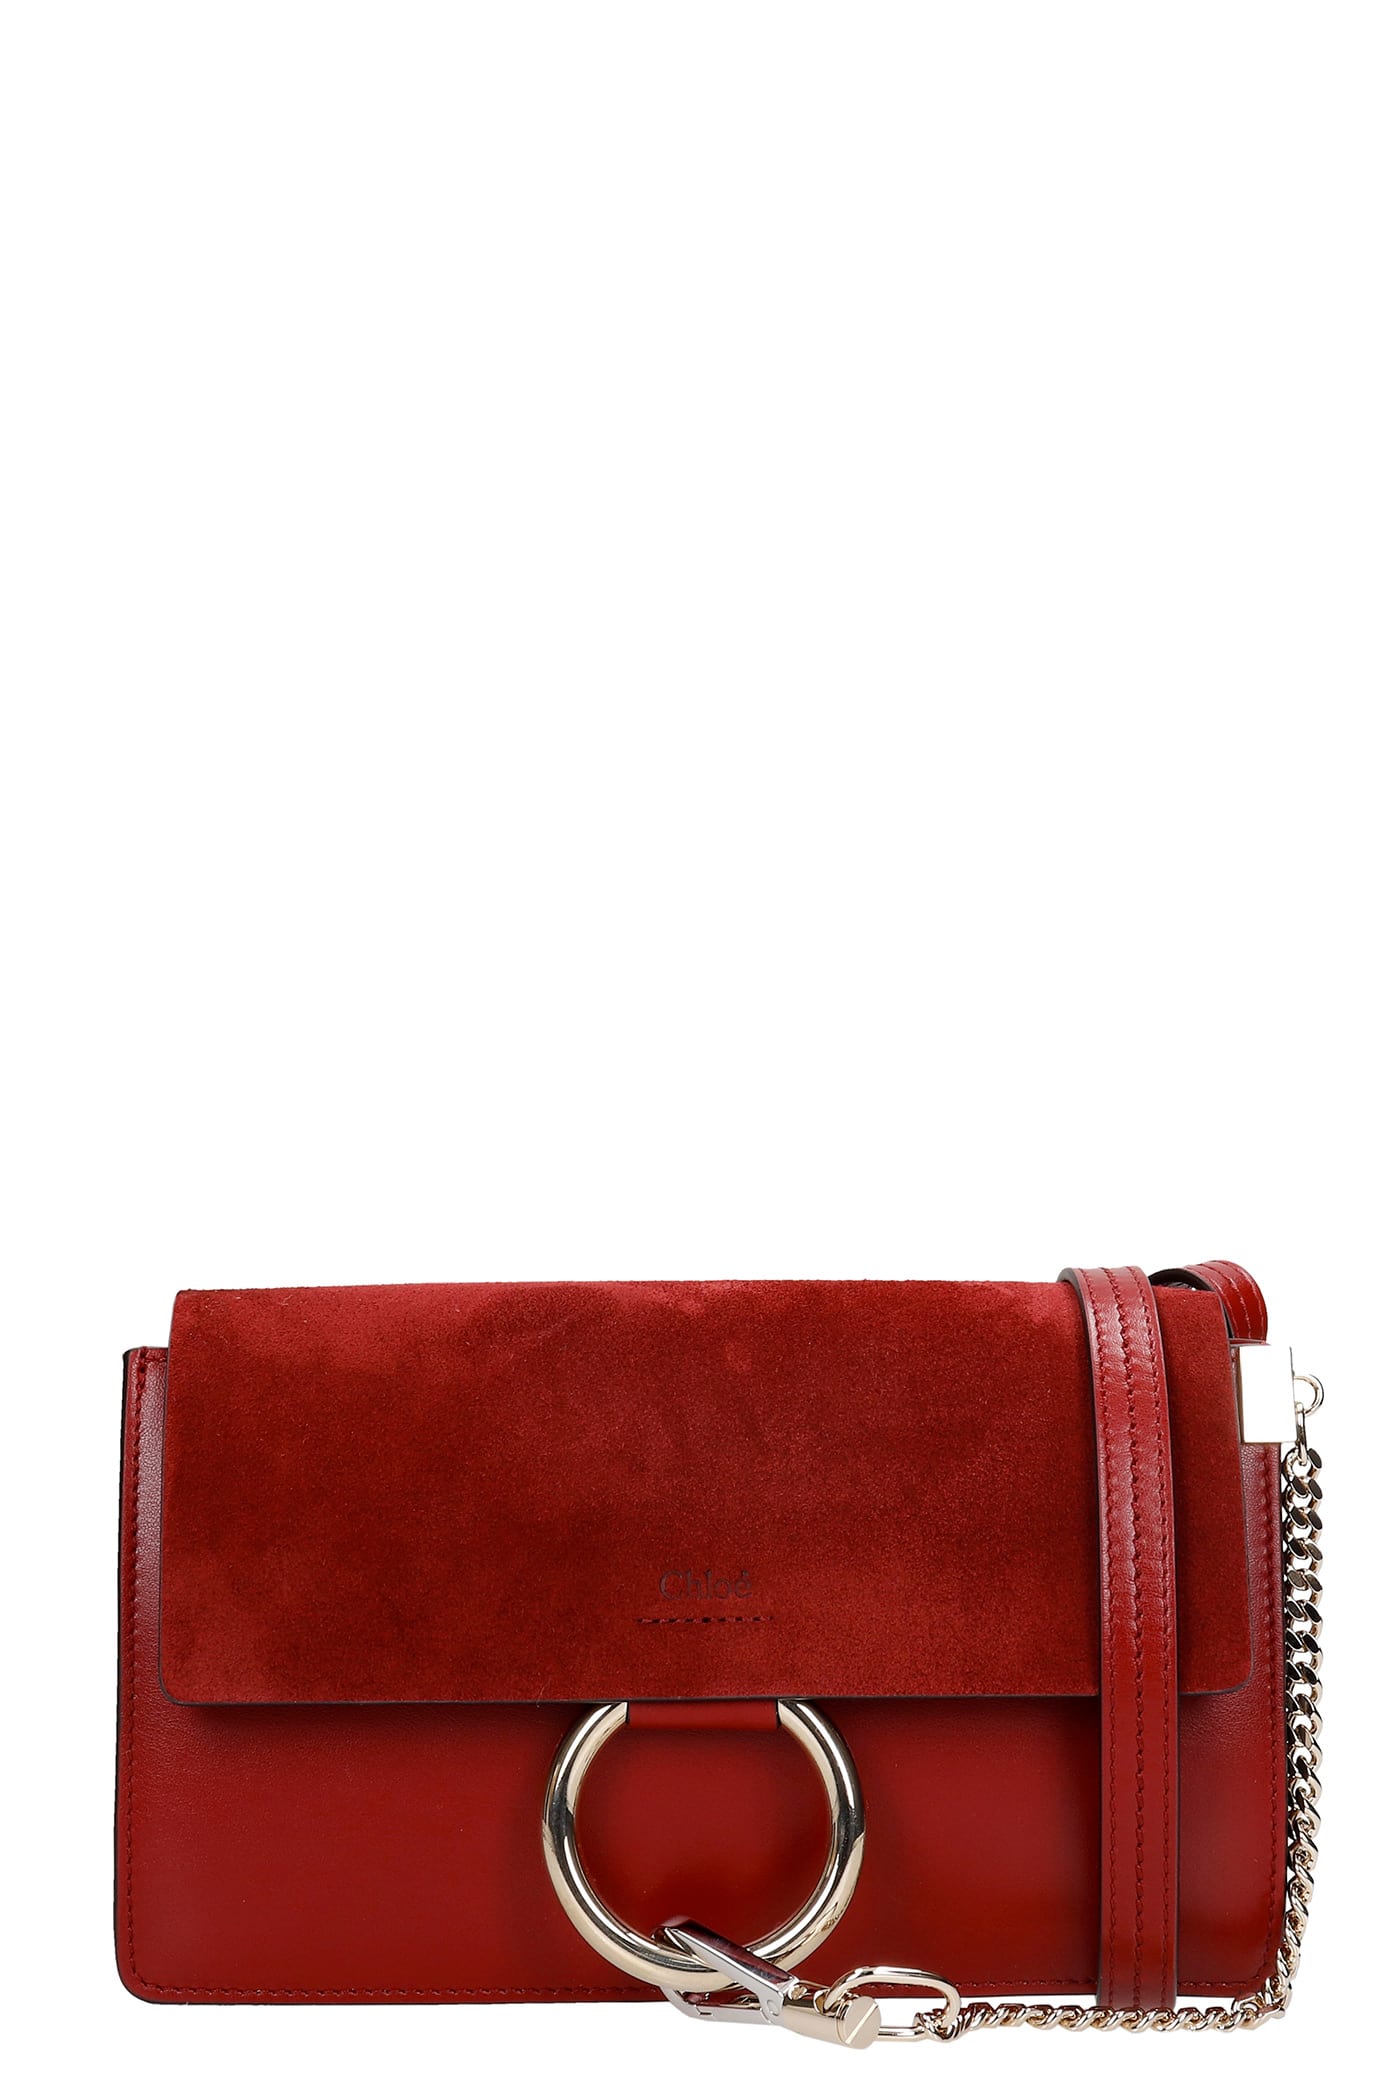 Chloé Faye Small Shoulder Bag In Bordeaux Suede And Leather